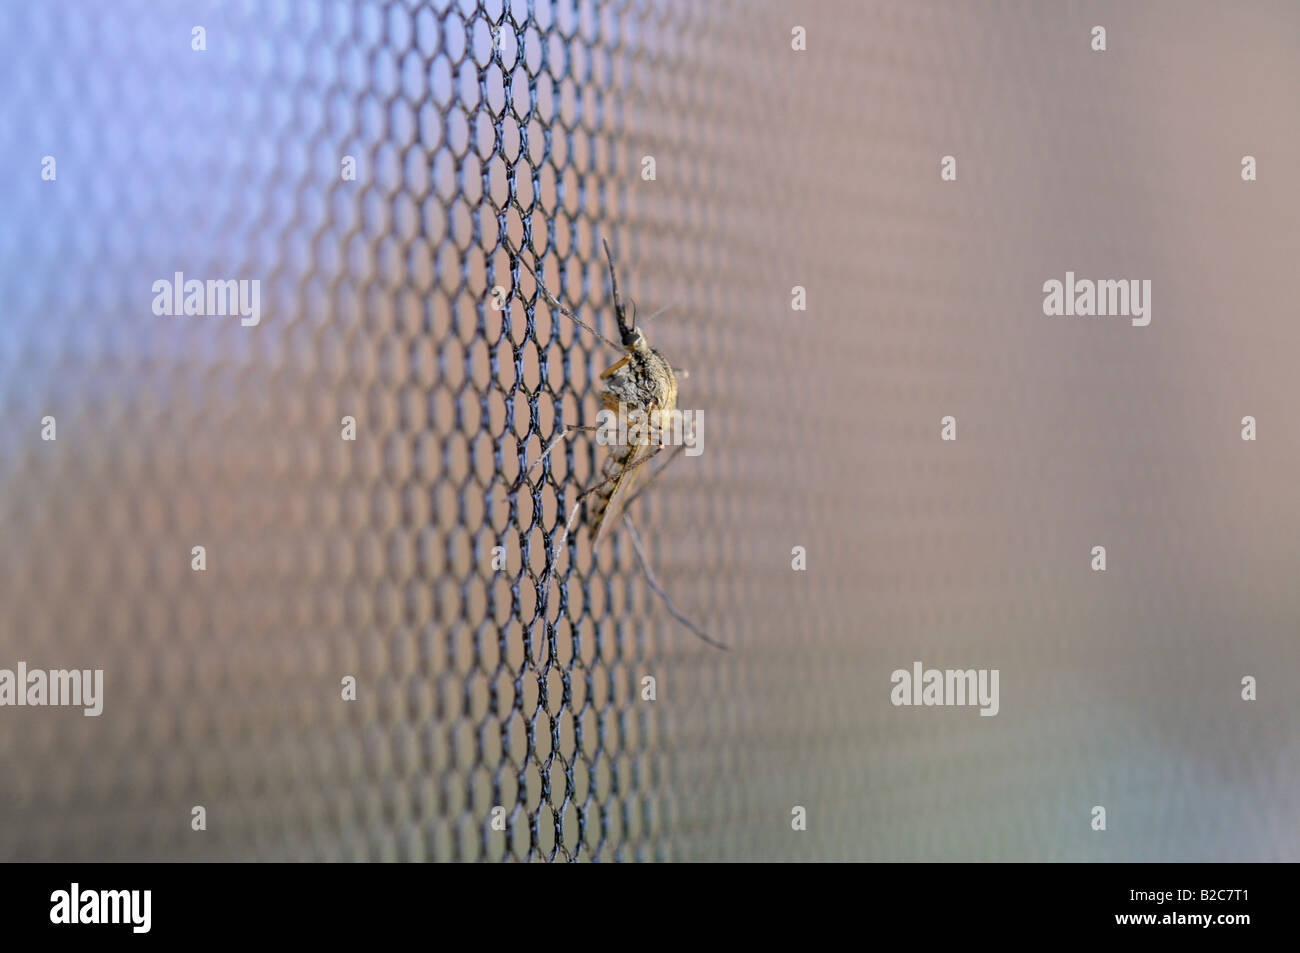 Common House Mosquito (Culex pipiens), on an insect protective grid Stock Photo